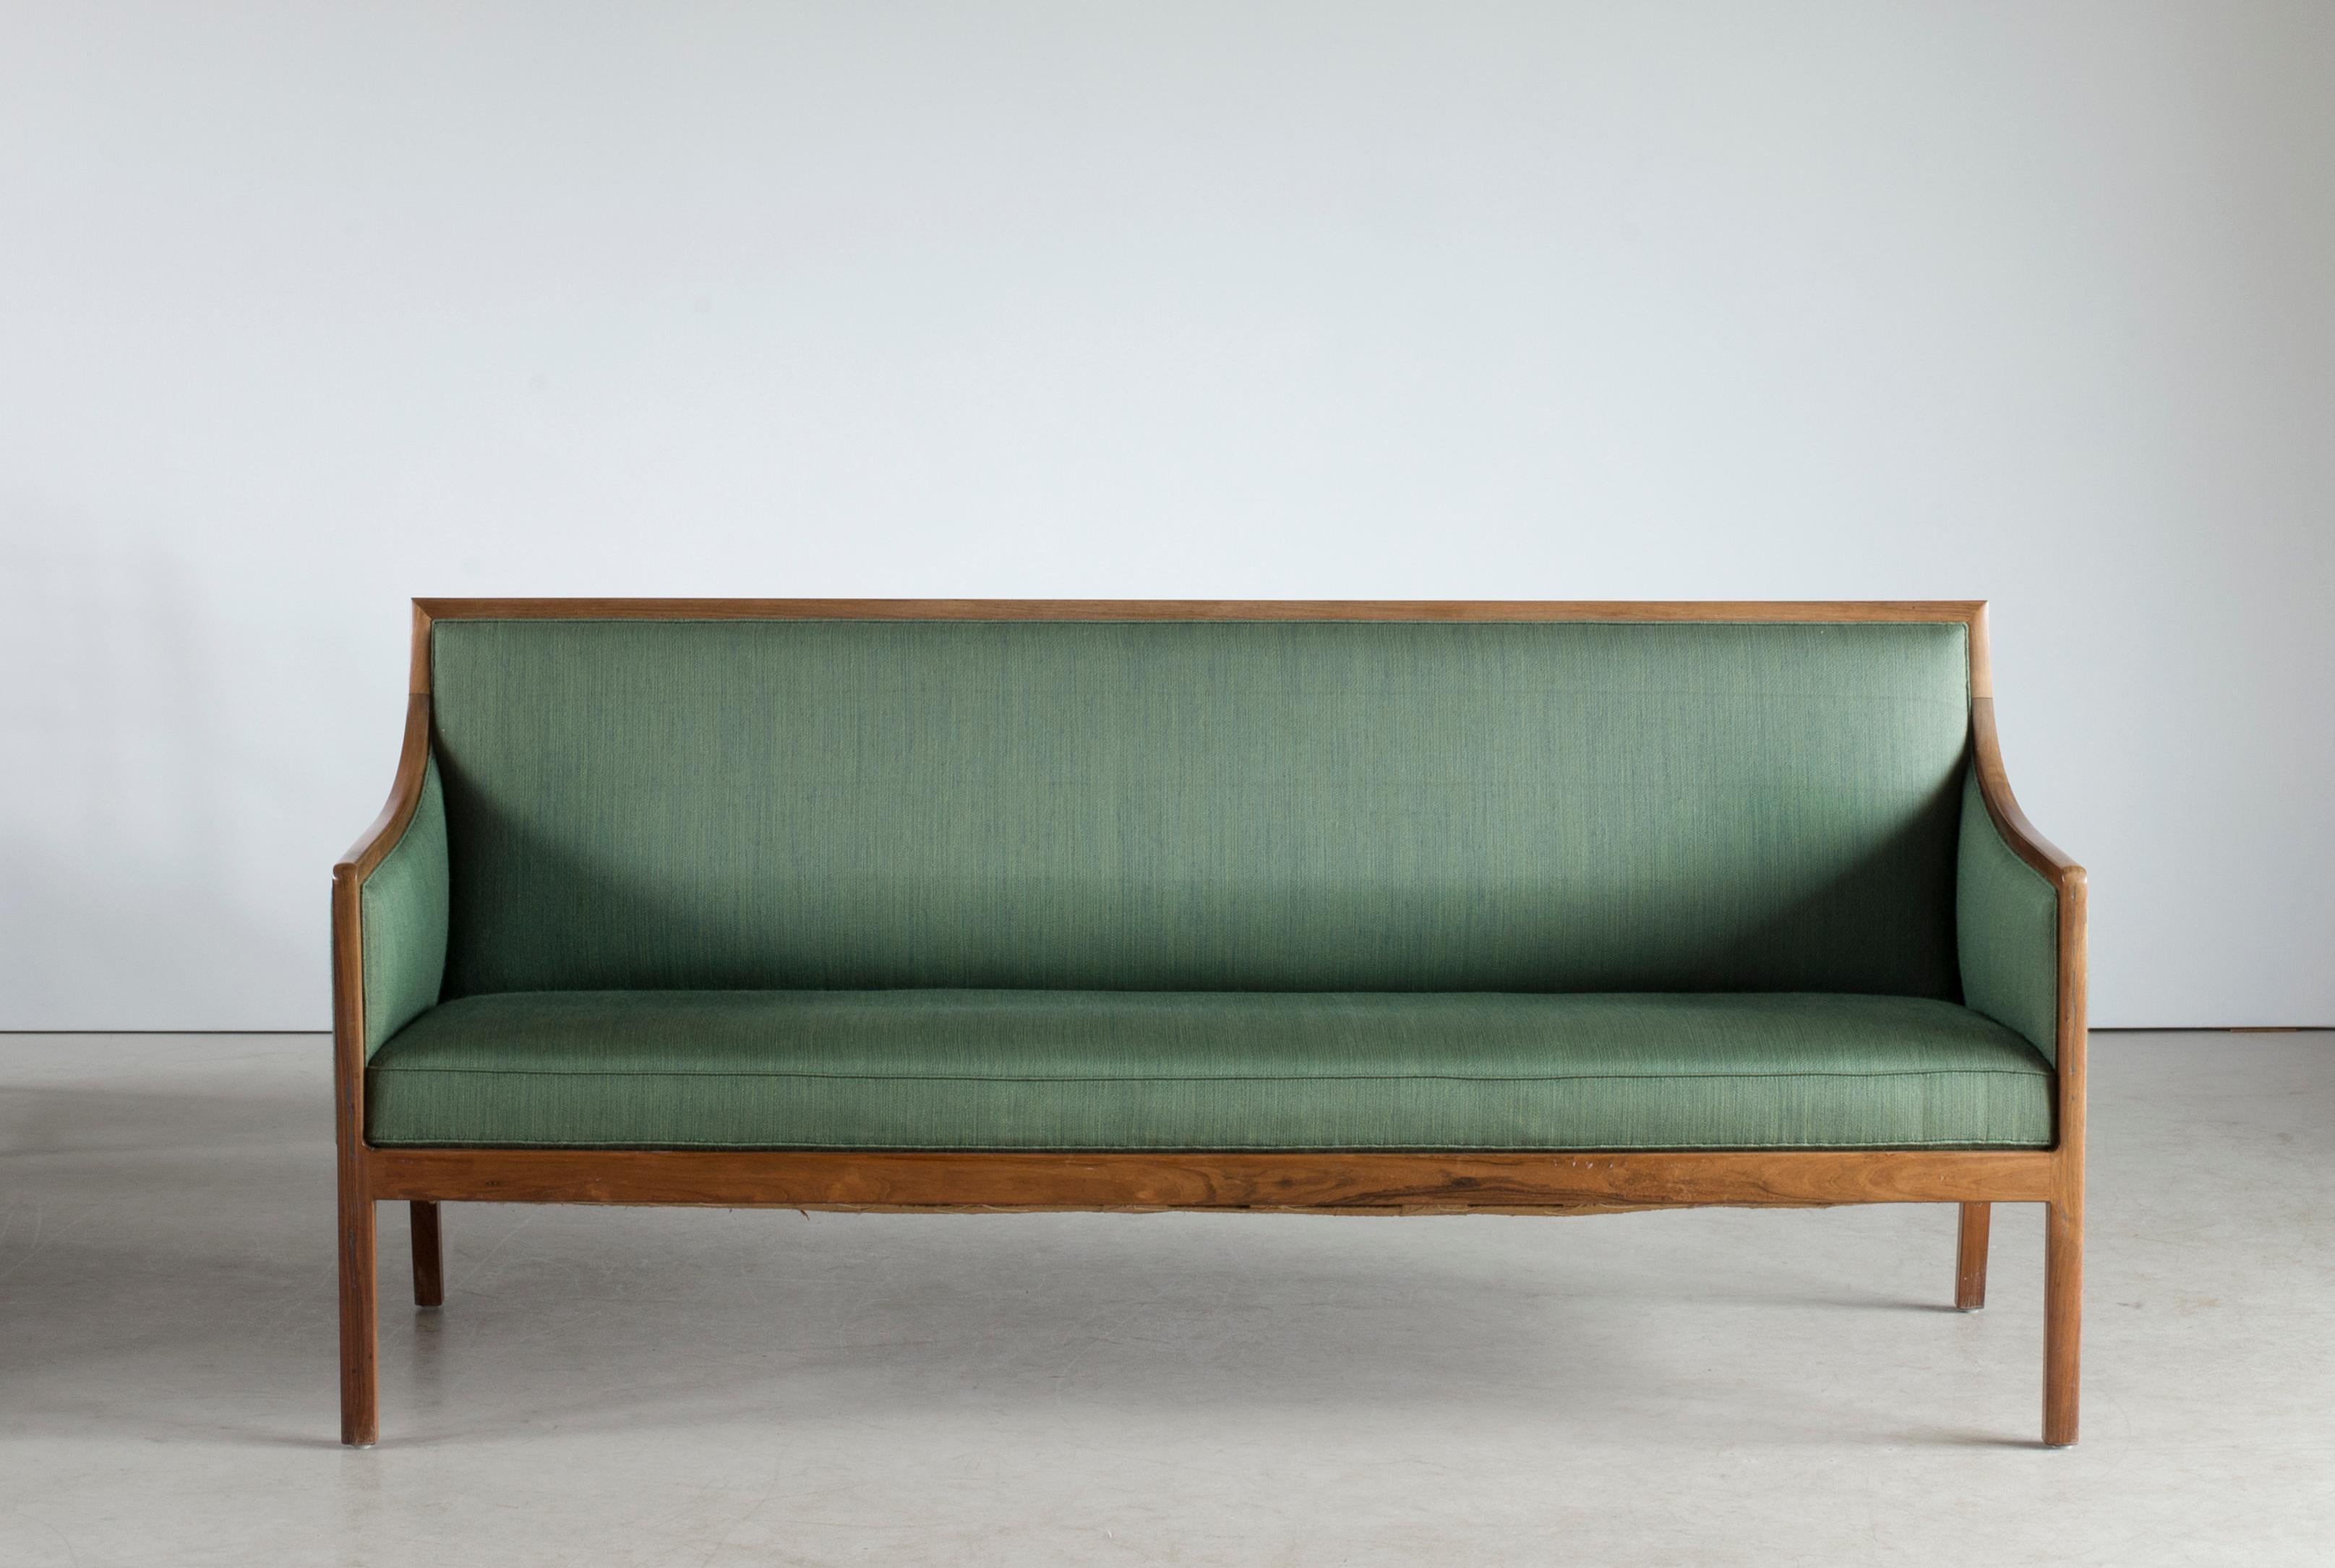 Jacob Kjaer Freestanding sofa with rosewood frame. SIdes, seat and back upholstered with green wool. Executed by cabinetmaker Wørts, Copenhagen, Denmark.